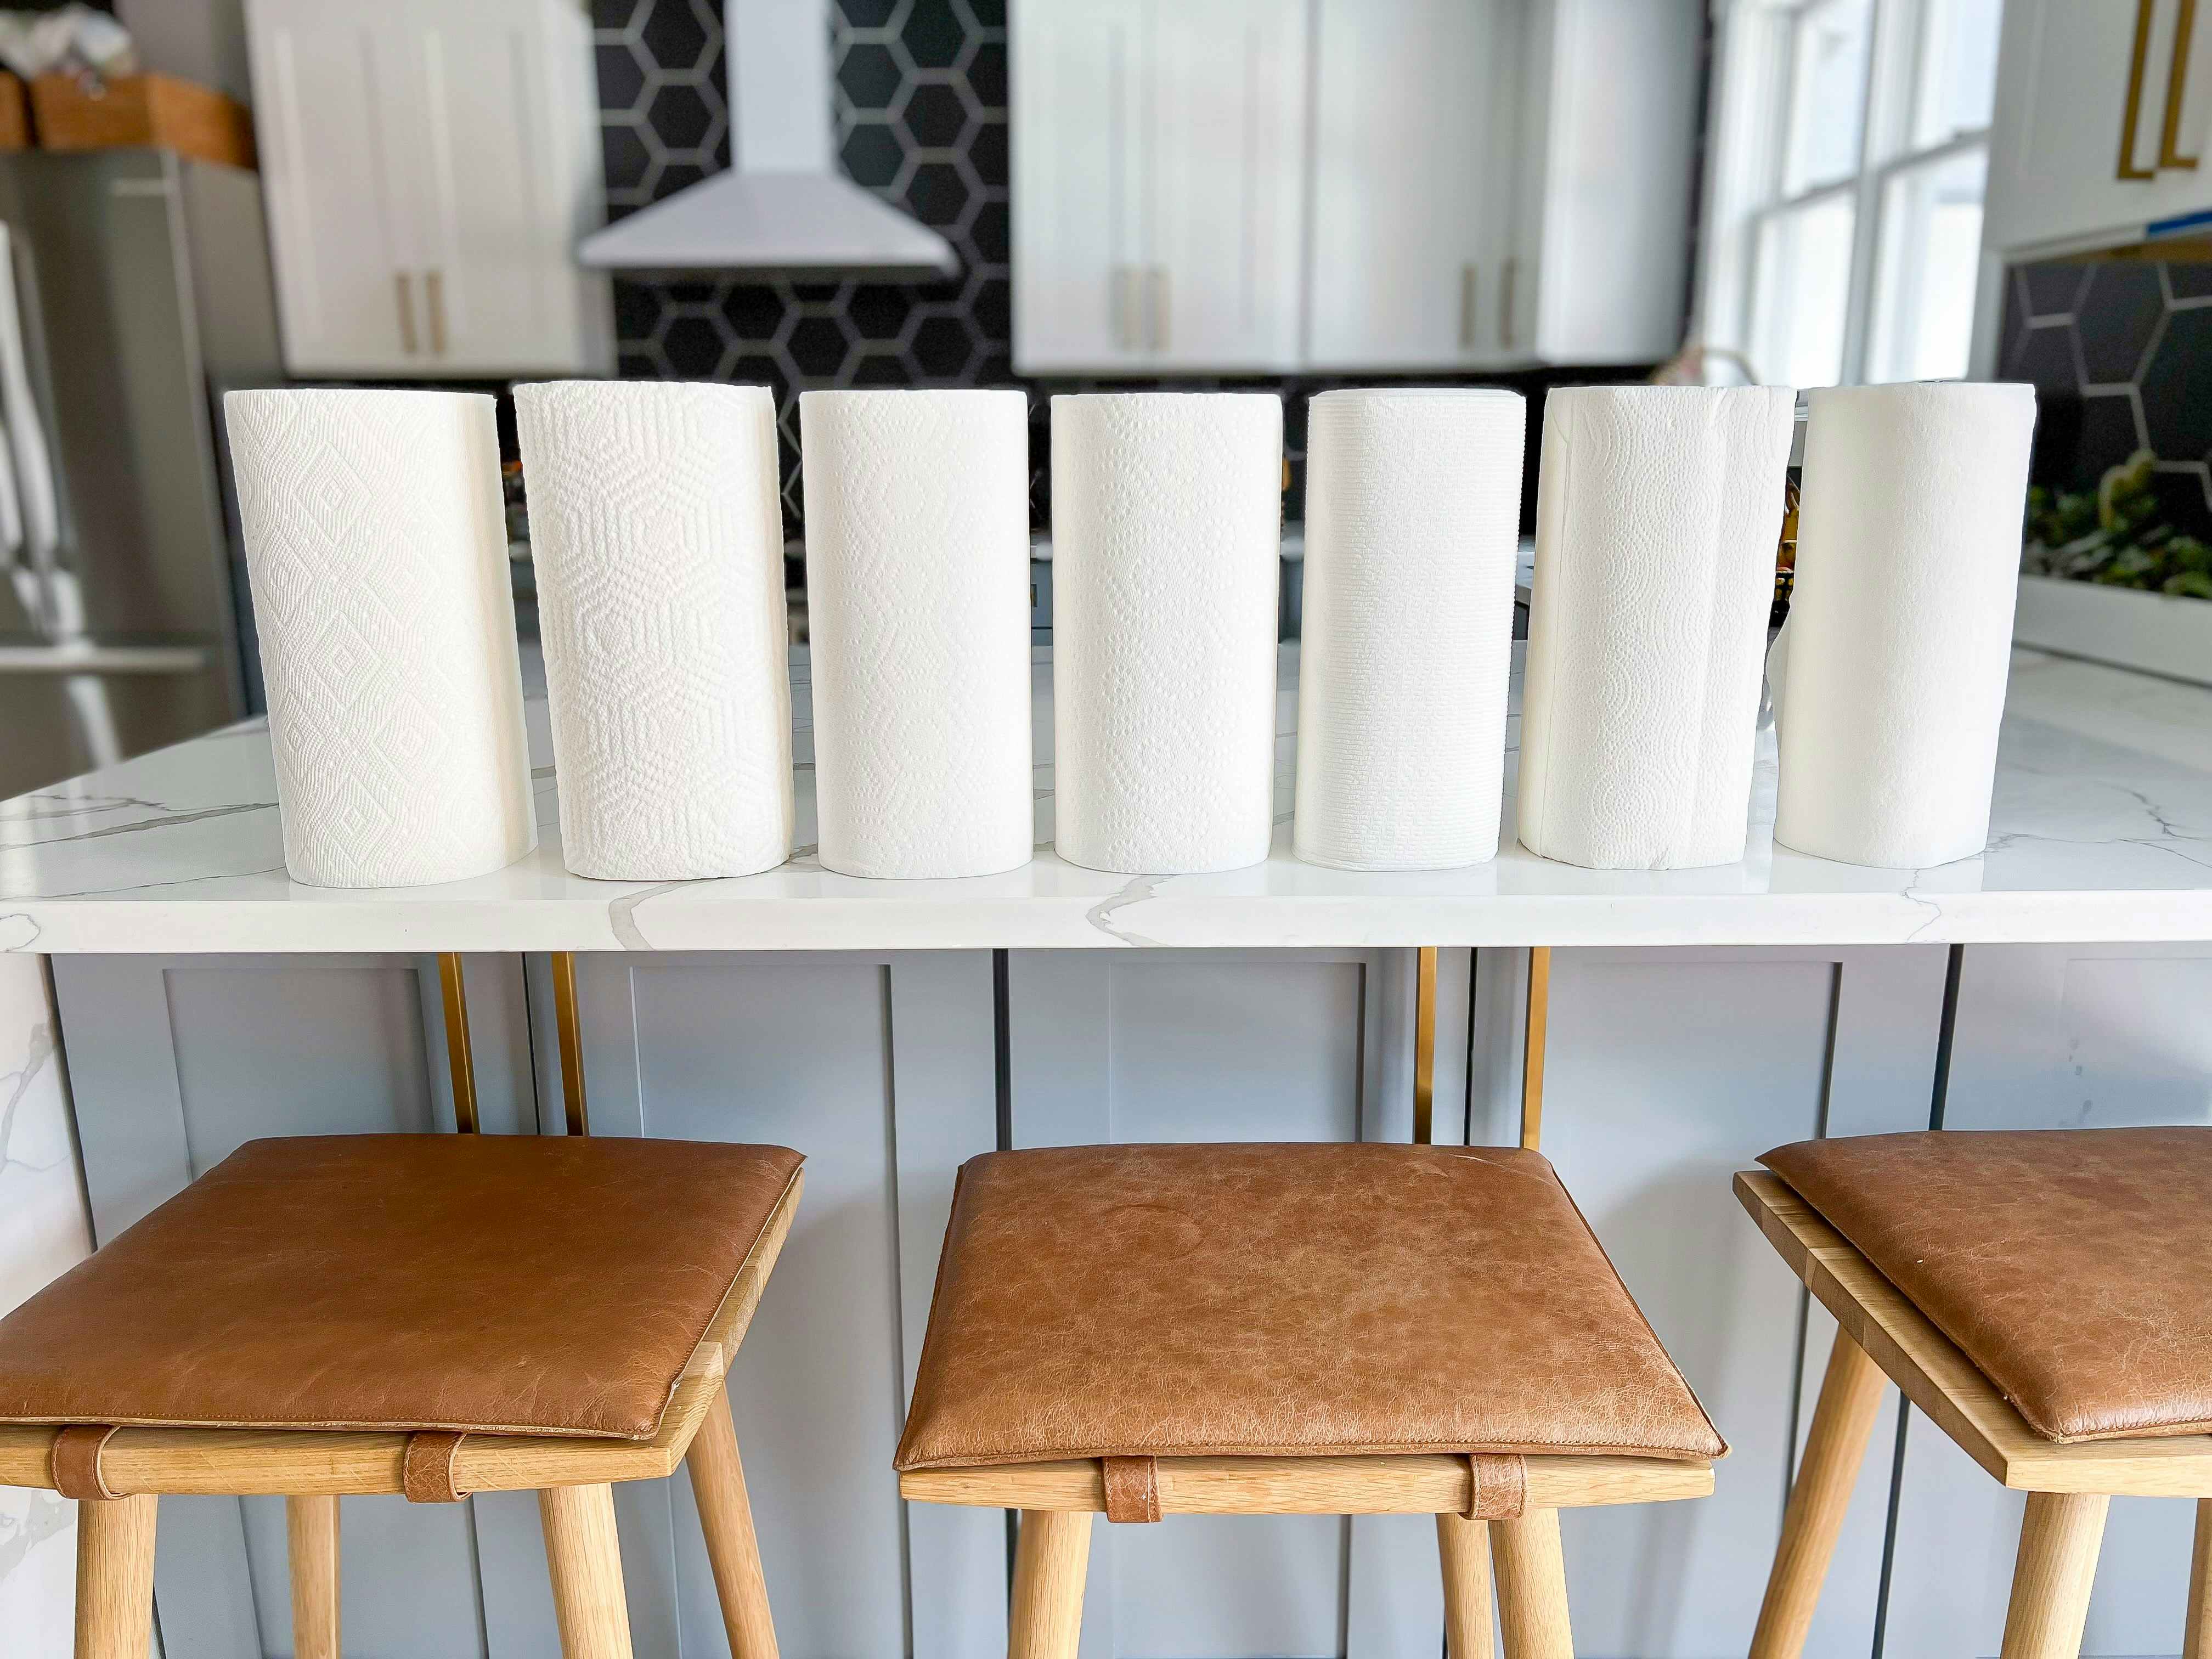 paper towels lined up on table